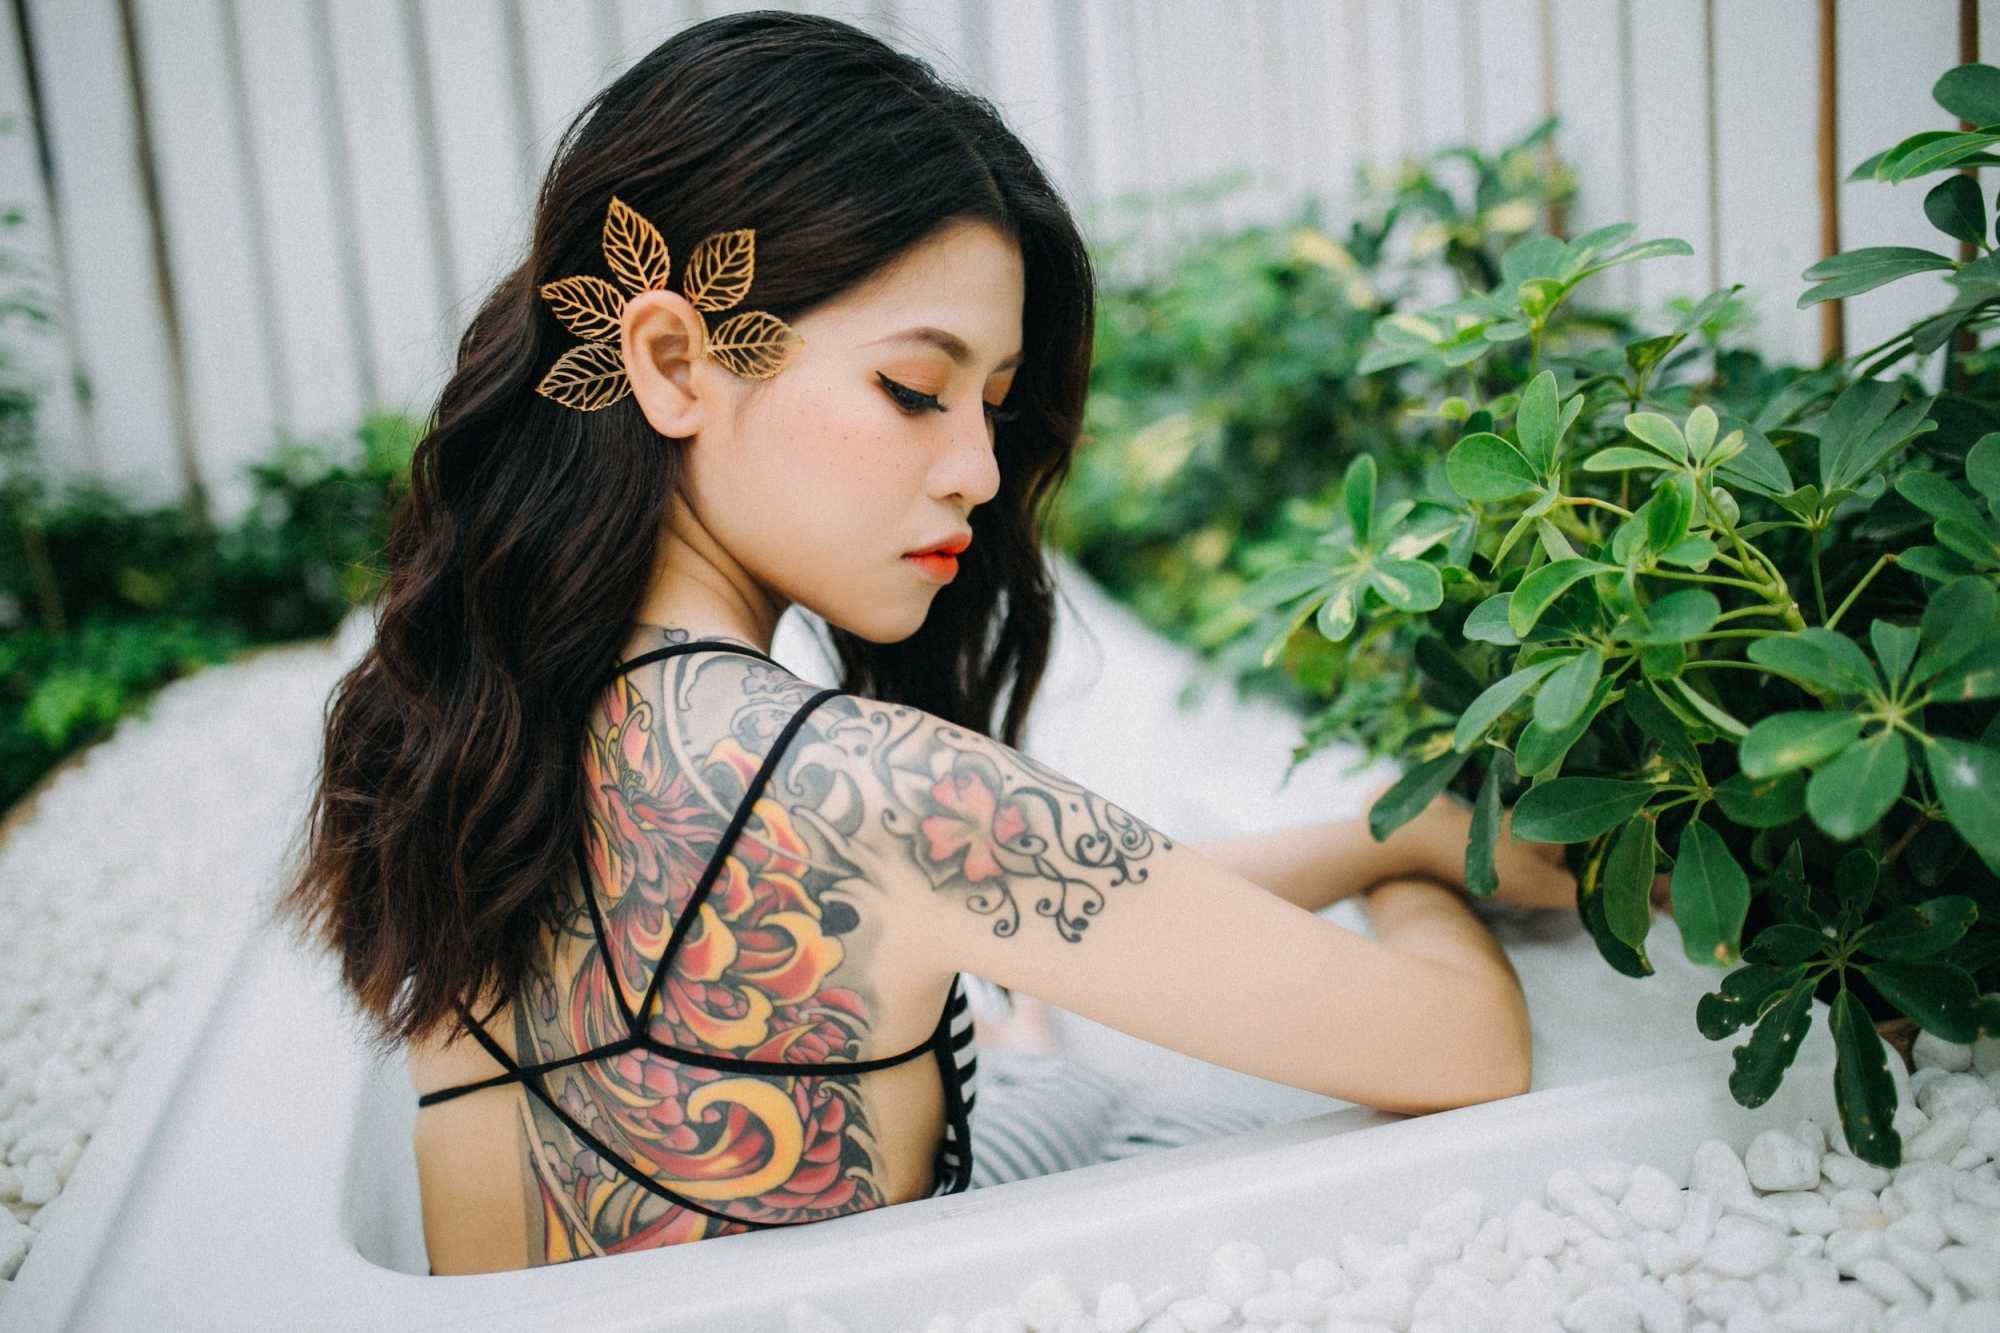 Japanese Tattoo Ideas - An Overview of Meanings, Styles and Rites